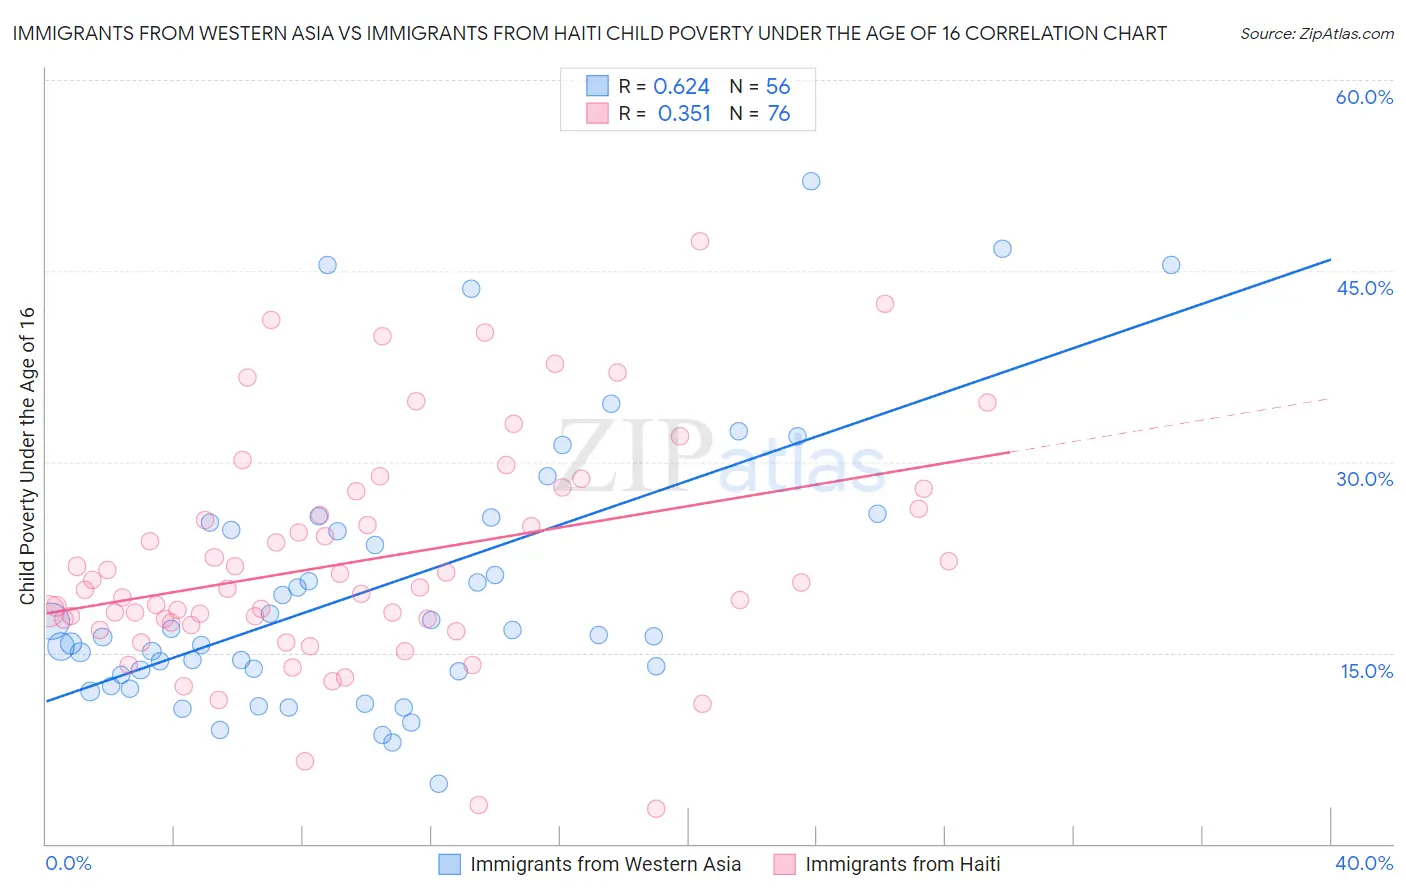 Immigrants from Western Asia vs Immigrants from Haiti Child Poverty Under the Age of 16